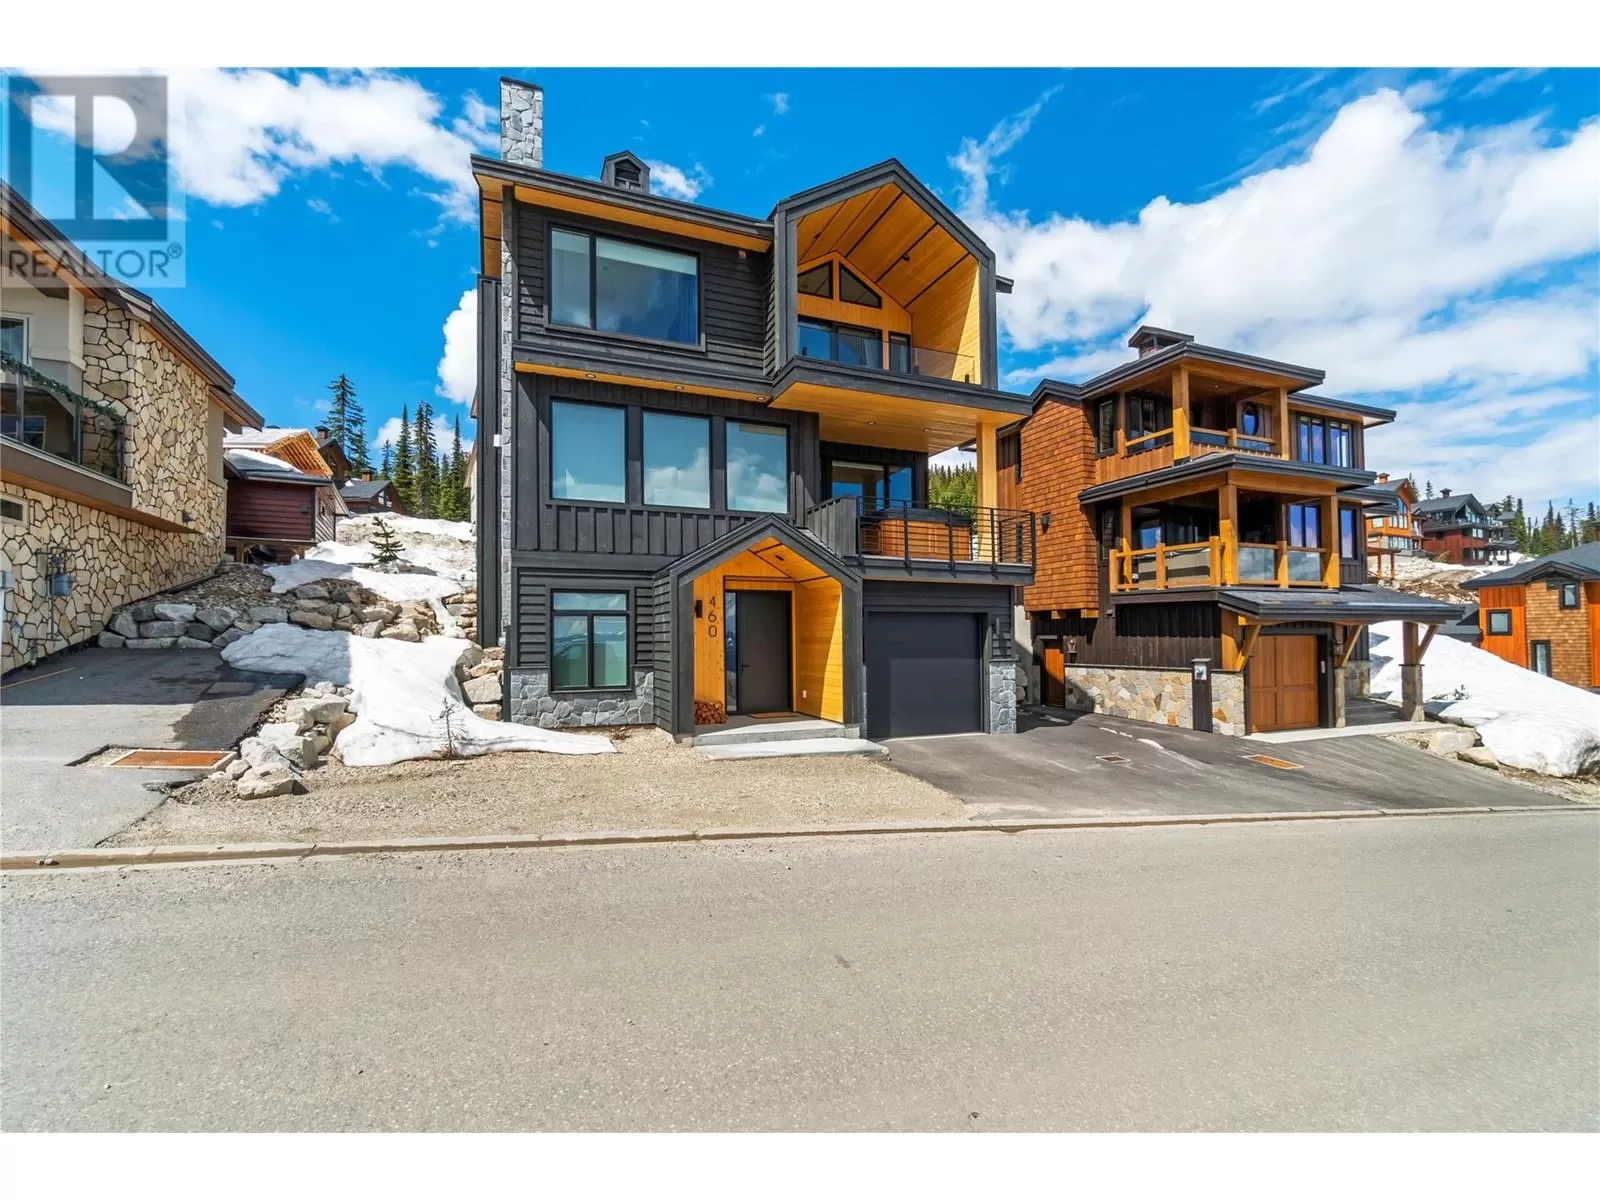 House for rent: 460 Feathertop Way, Big White, British Columbia V1P 1P3